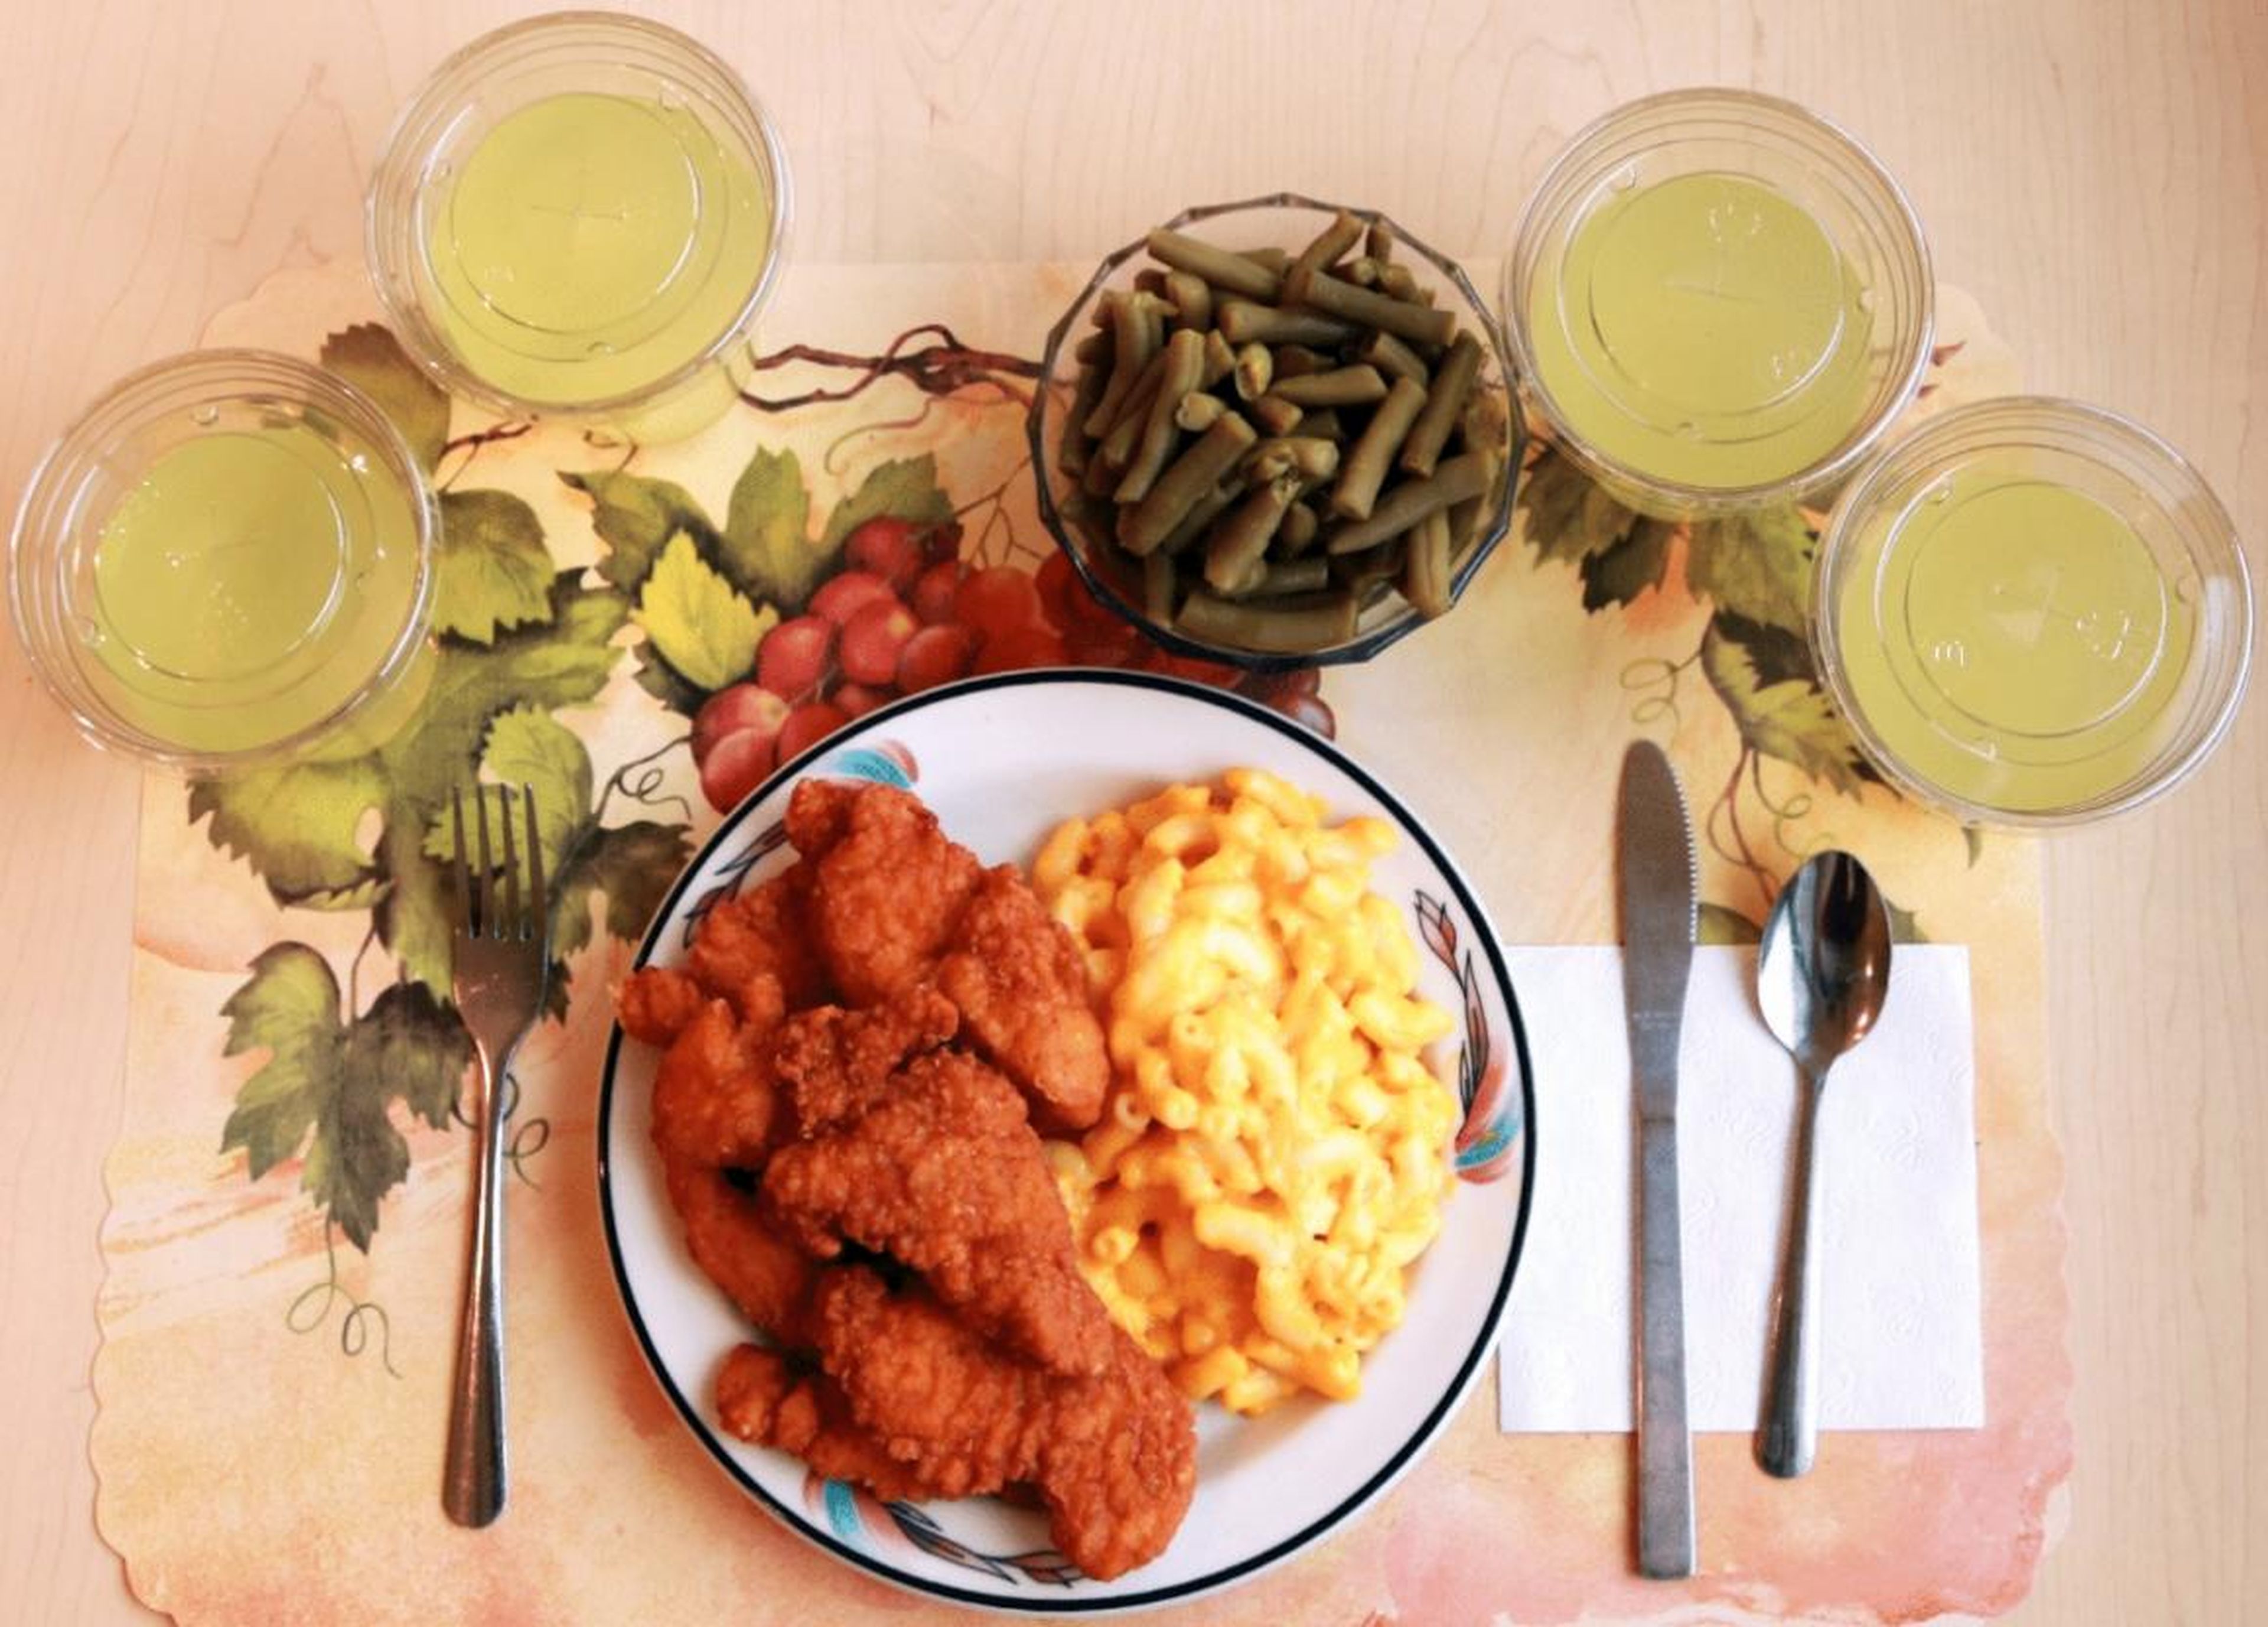 This processed dinner of prepared mac and cheese, chicken tenders and canned green beans had to be supplemented with tons of diet lemonade fortified with fiber in order to match the nutrient levels in an unprocessed meal.